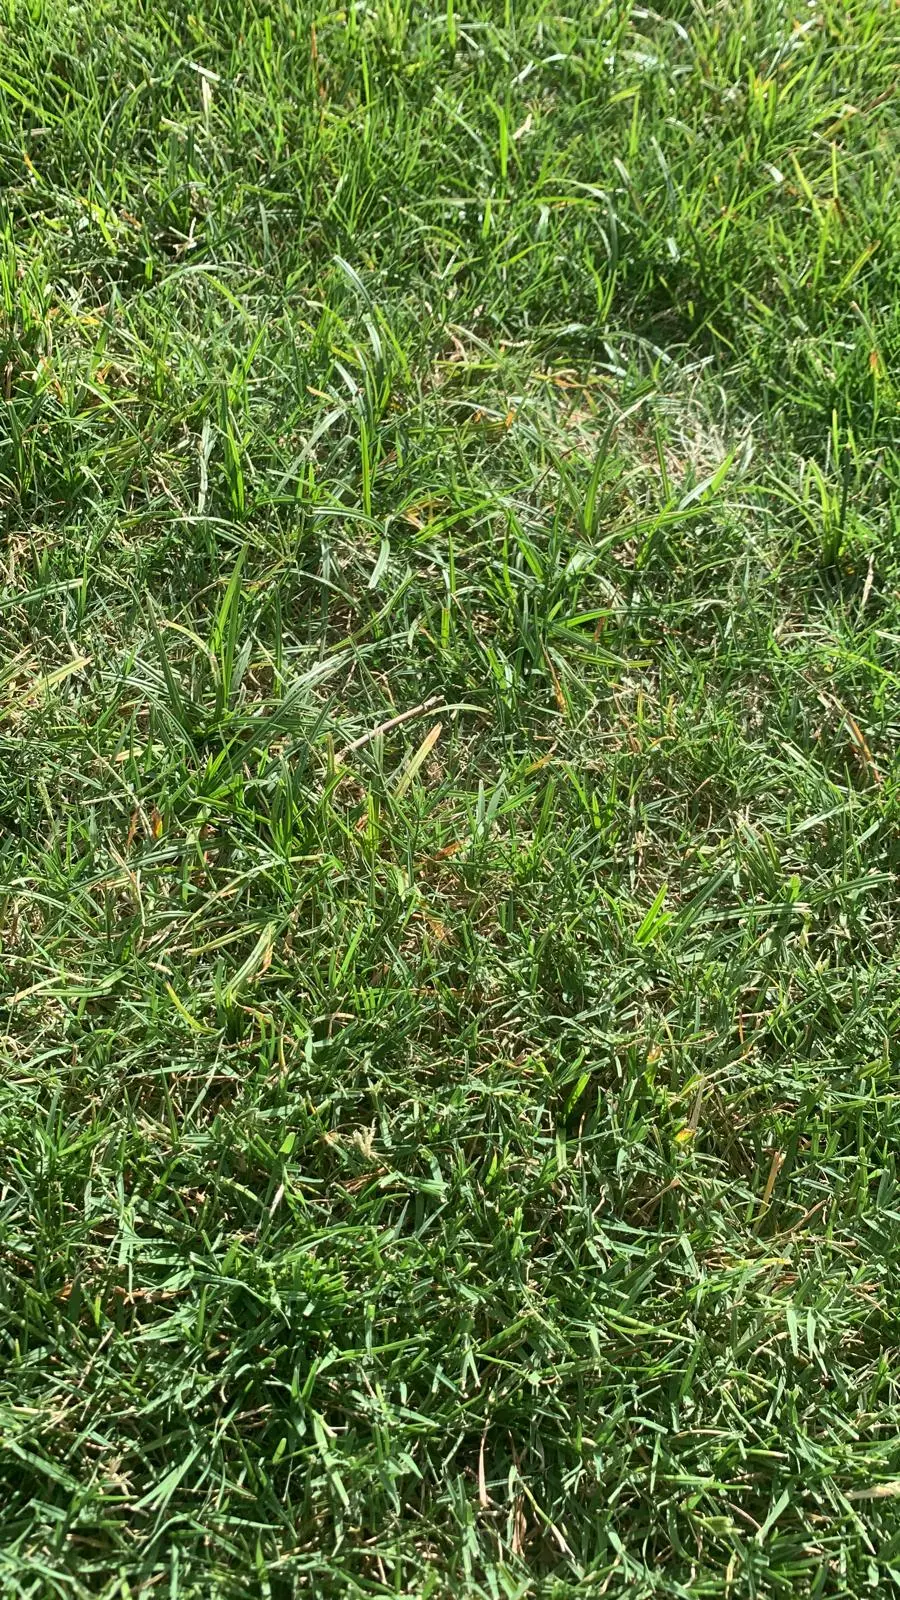 Diagnosing and Controlling Nutsedge and Kyllinga in North Texas Lawns